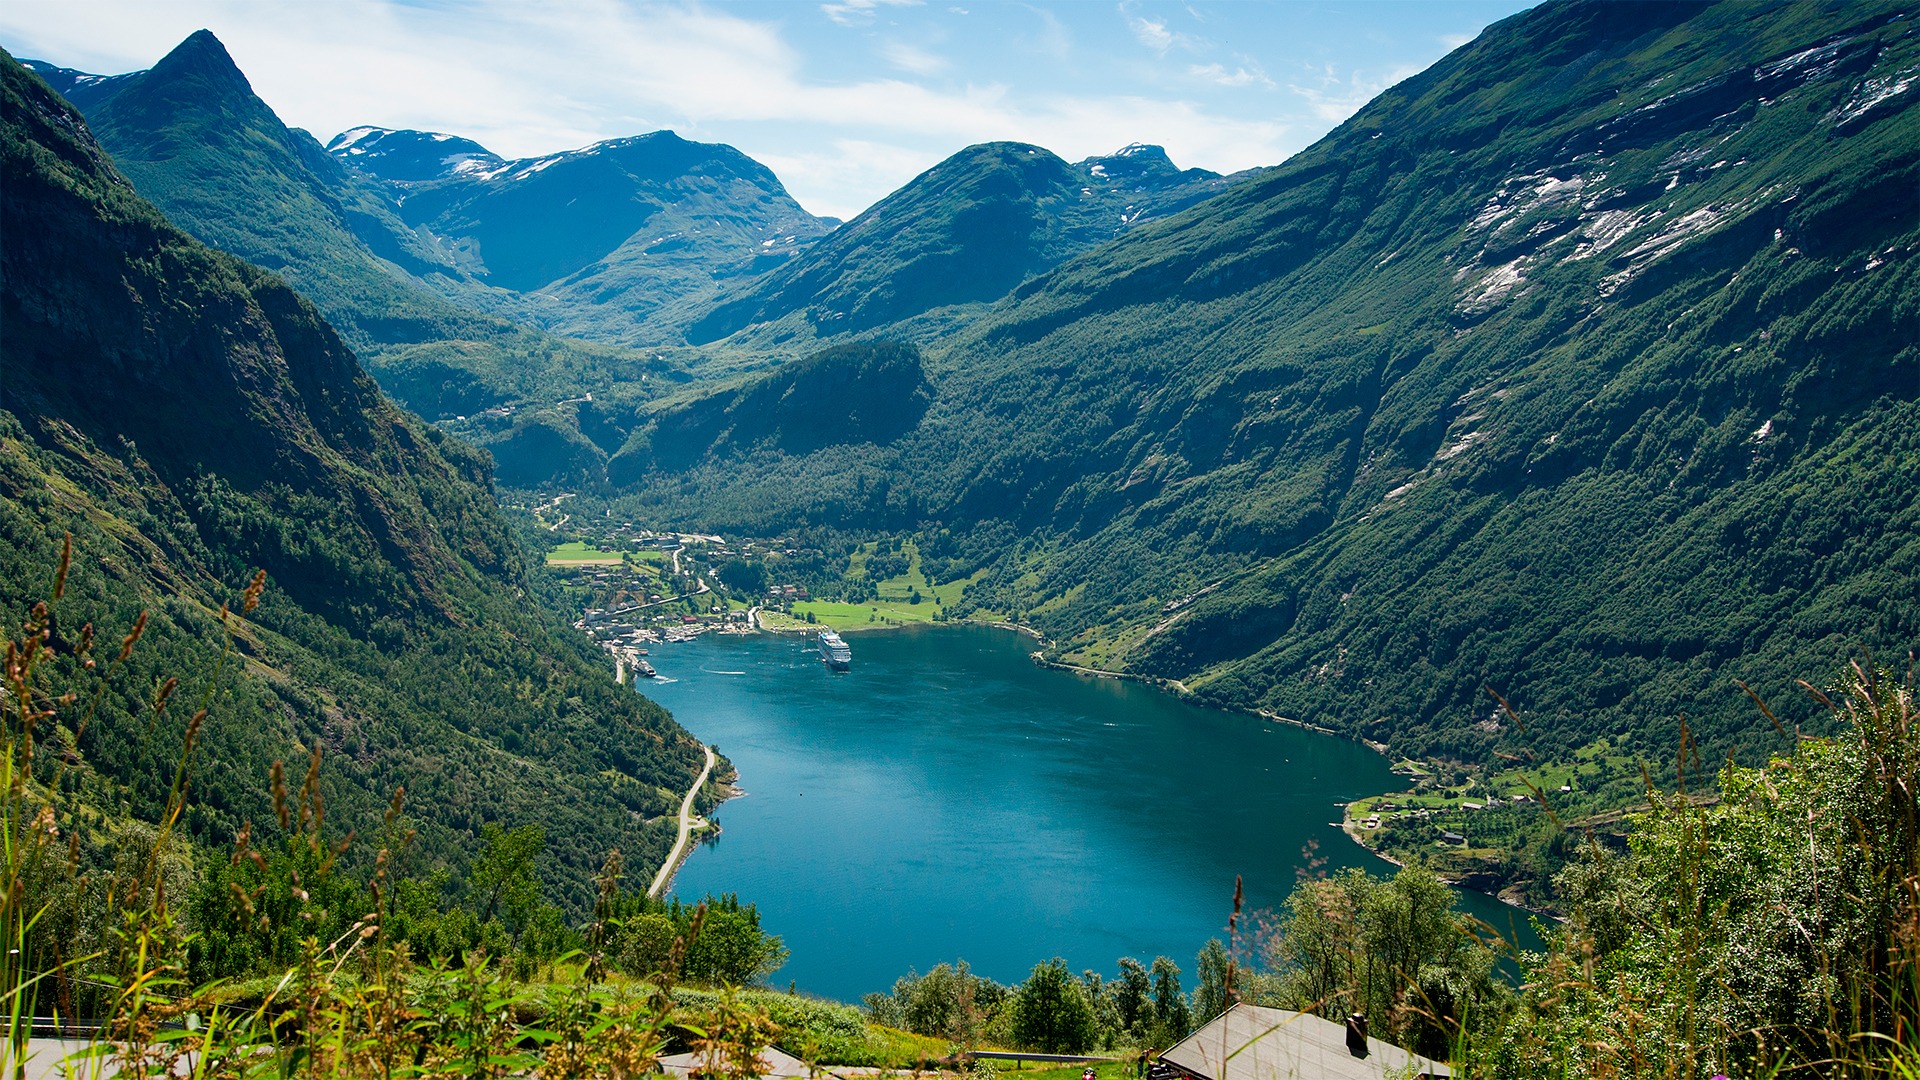 Photo of Geirangerfjord. Geirangerfjord is part of the West Norwegian Fjords area, which is inscribed on the UNESCO World Heritage List. Photo by Ludovic Peron, (CCBY-SA) via Wikimedia Commons